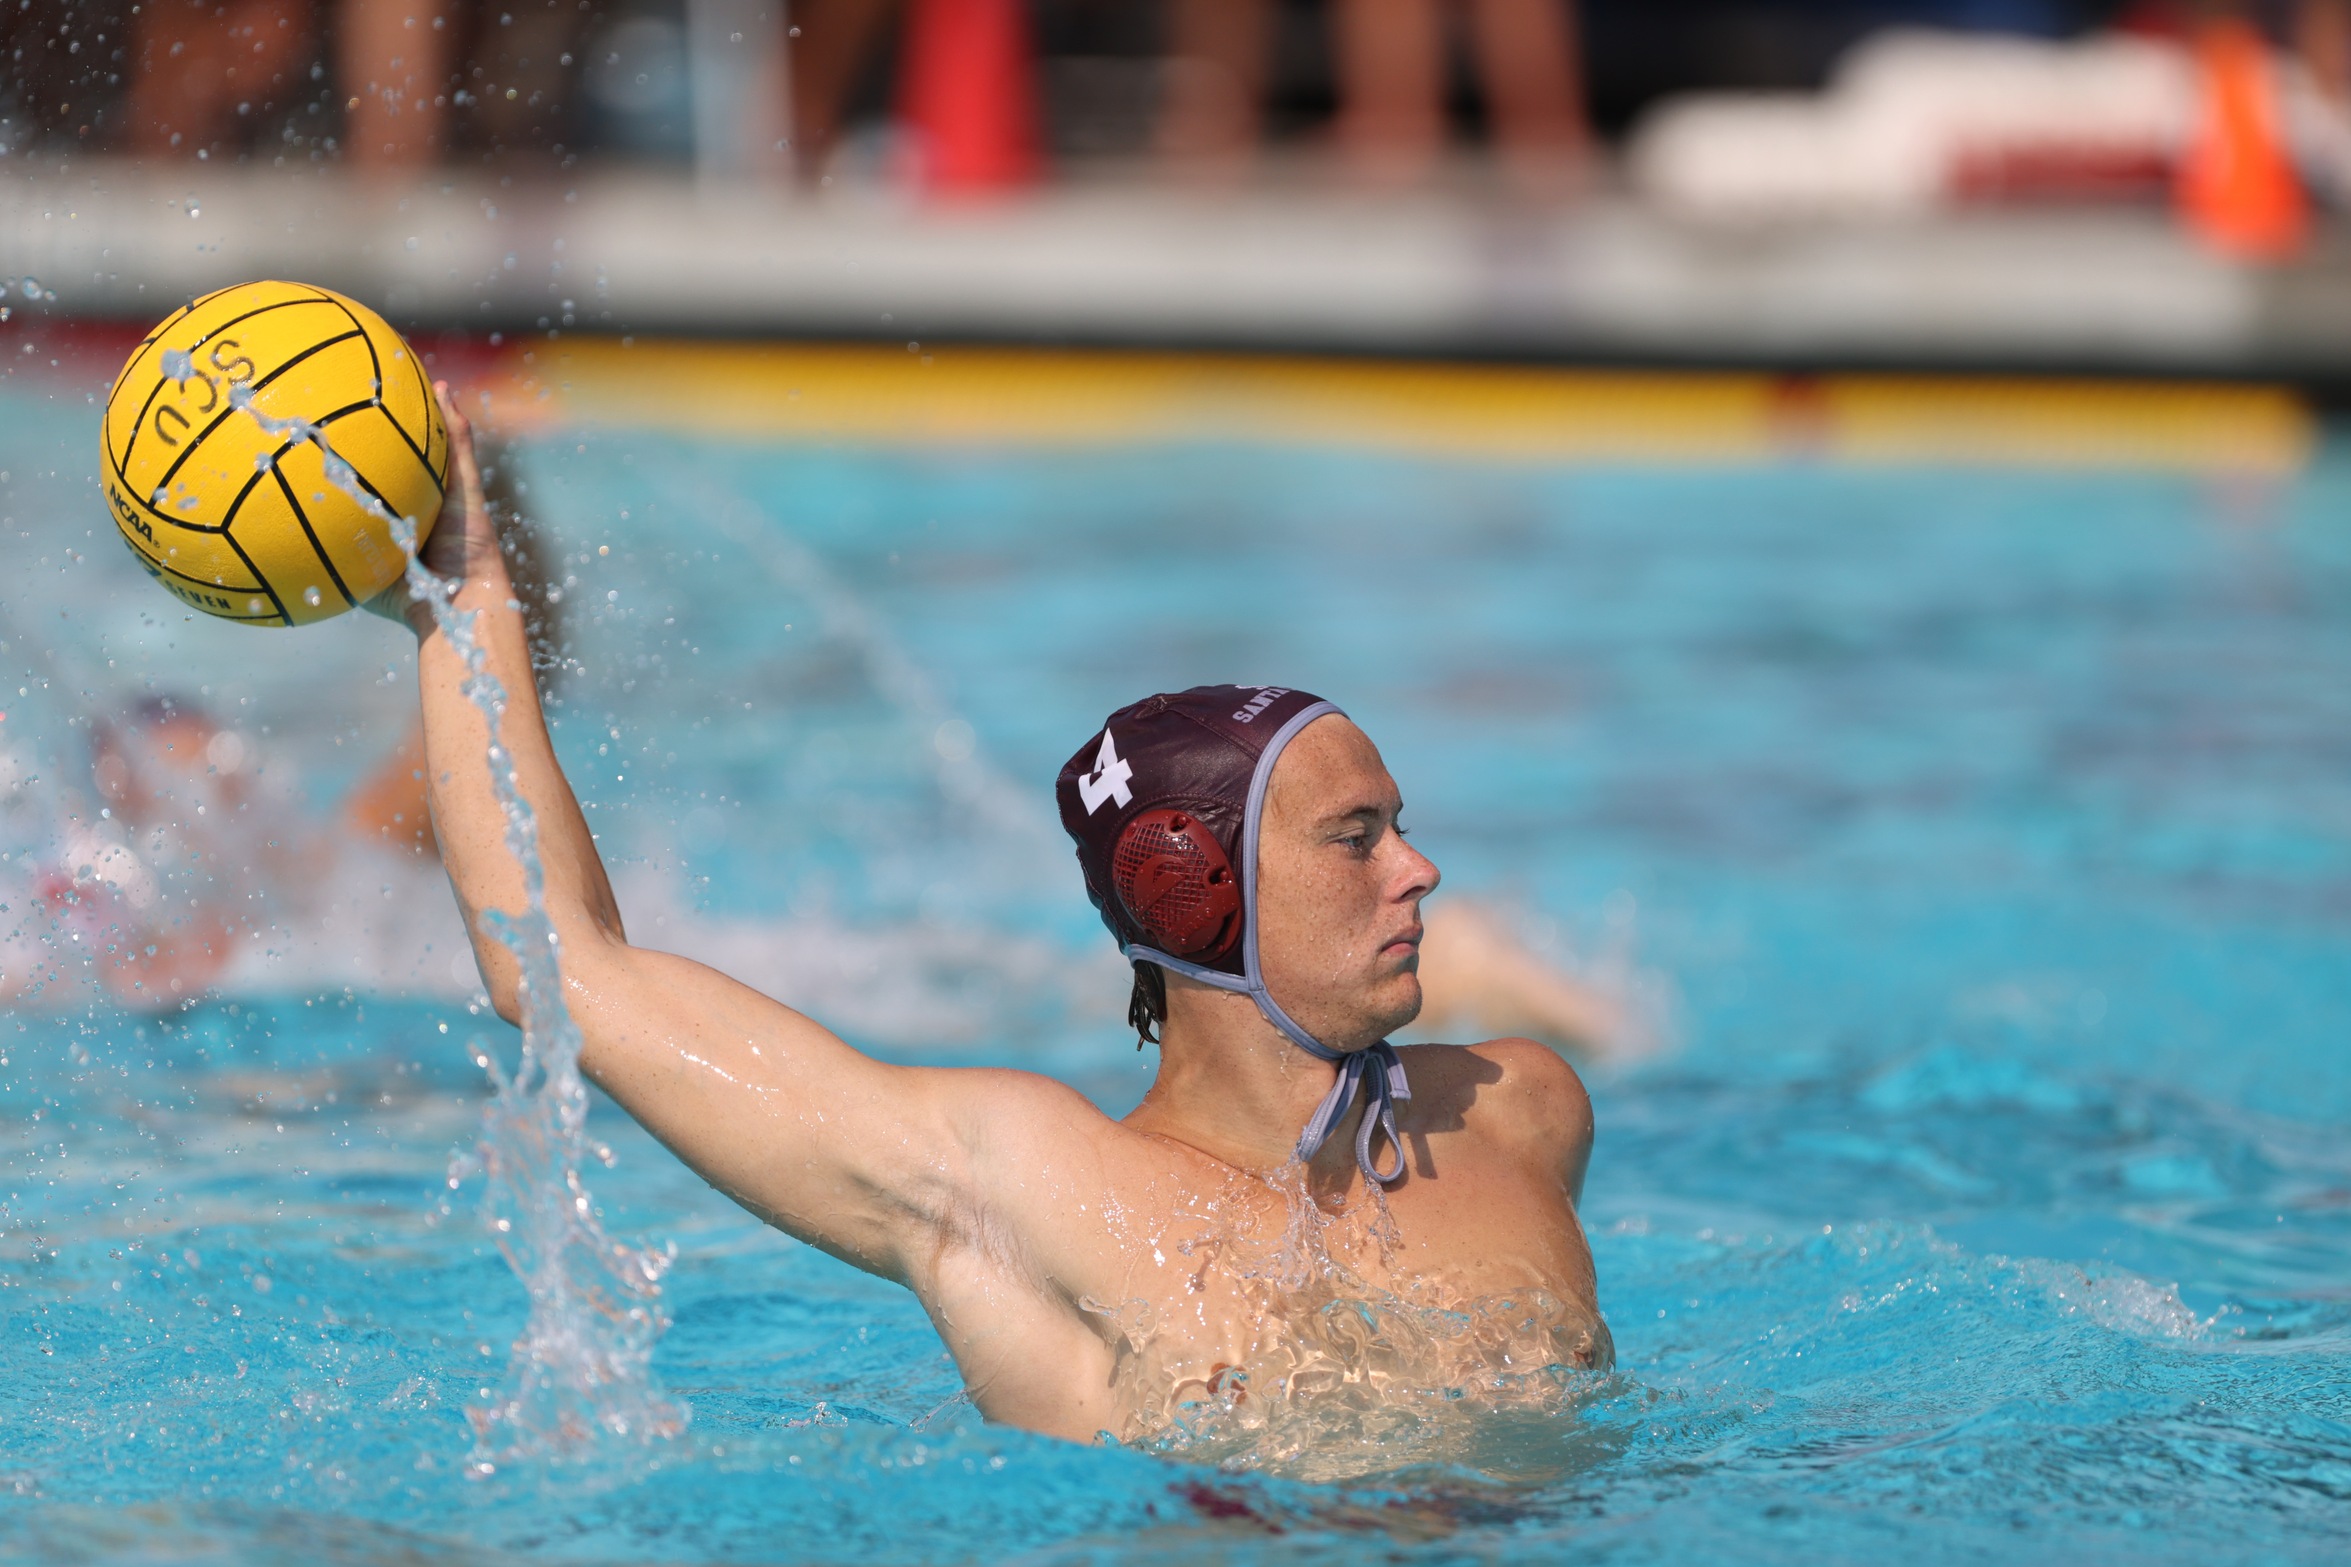 Road Trip At LMU Marks Busy Roadtrip For Men's Water Polo